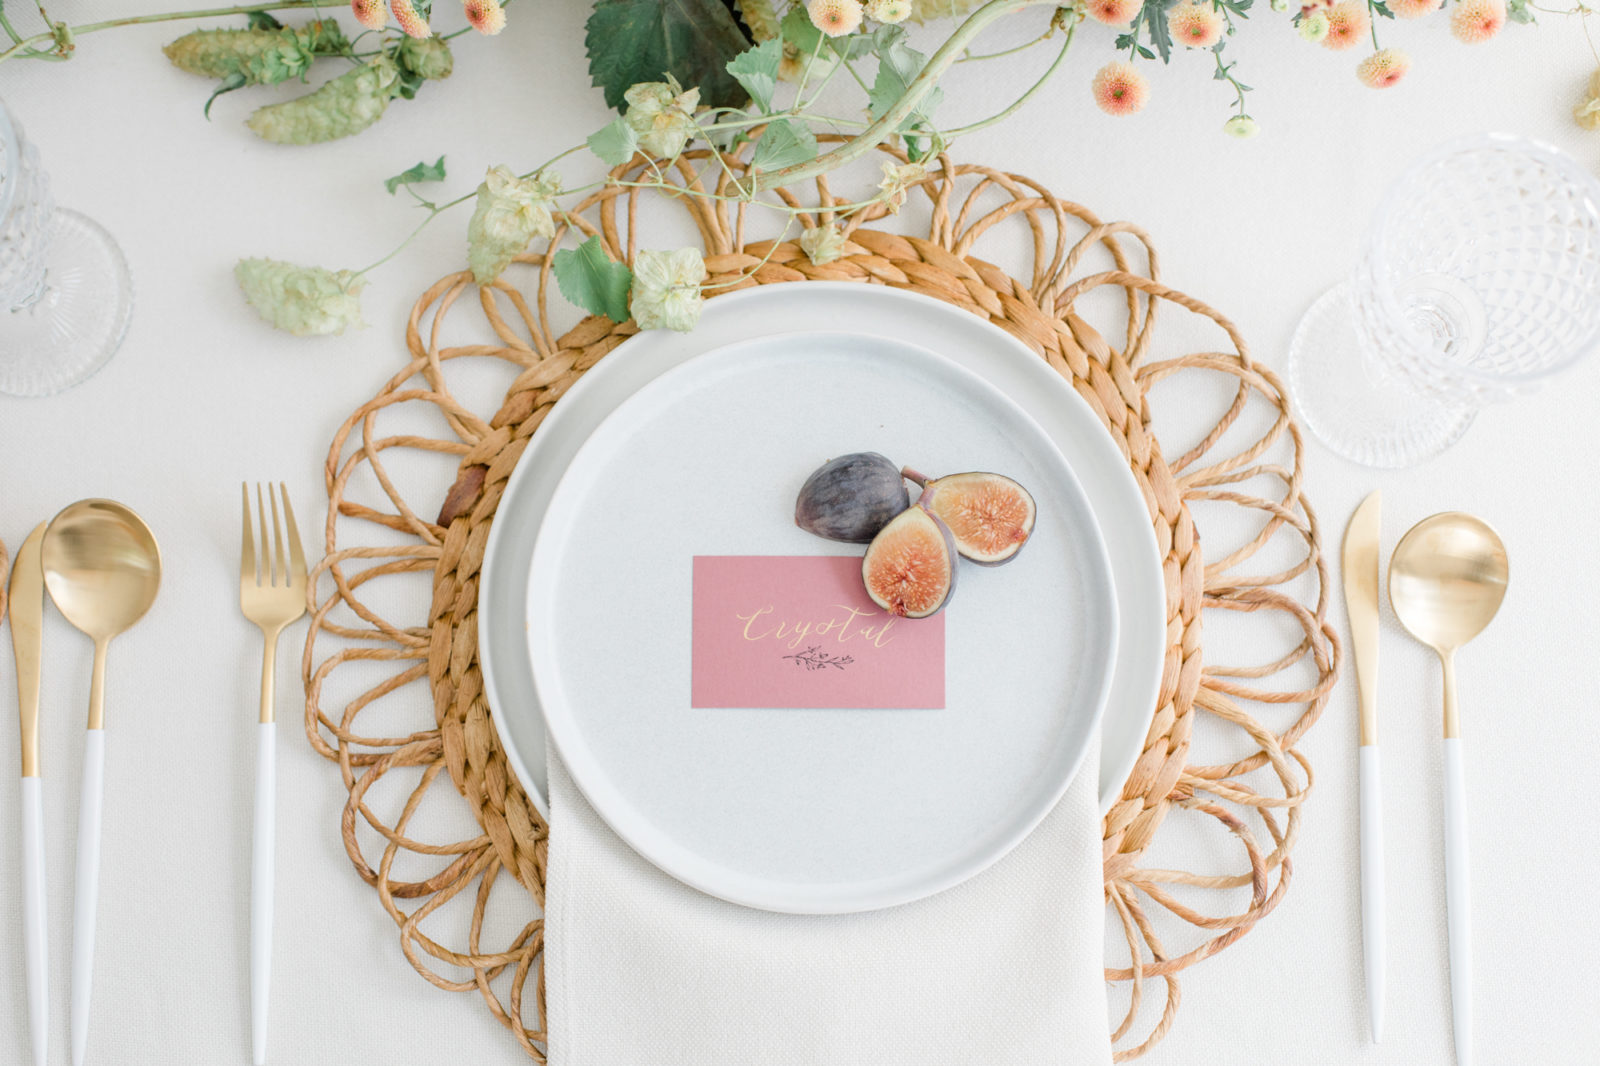 Figs, Whimsical Florals and Honey Accents in This Secluded Backyard Wedding Inspiration Featured by Brontë Bride